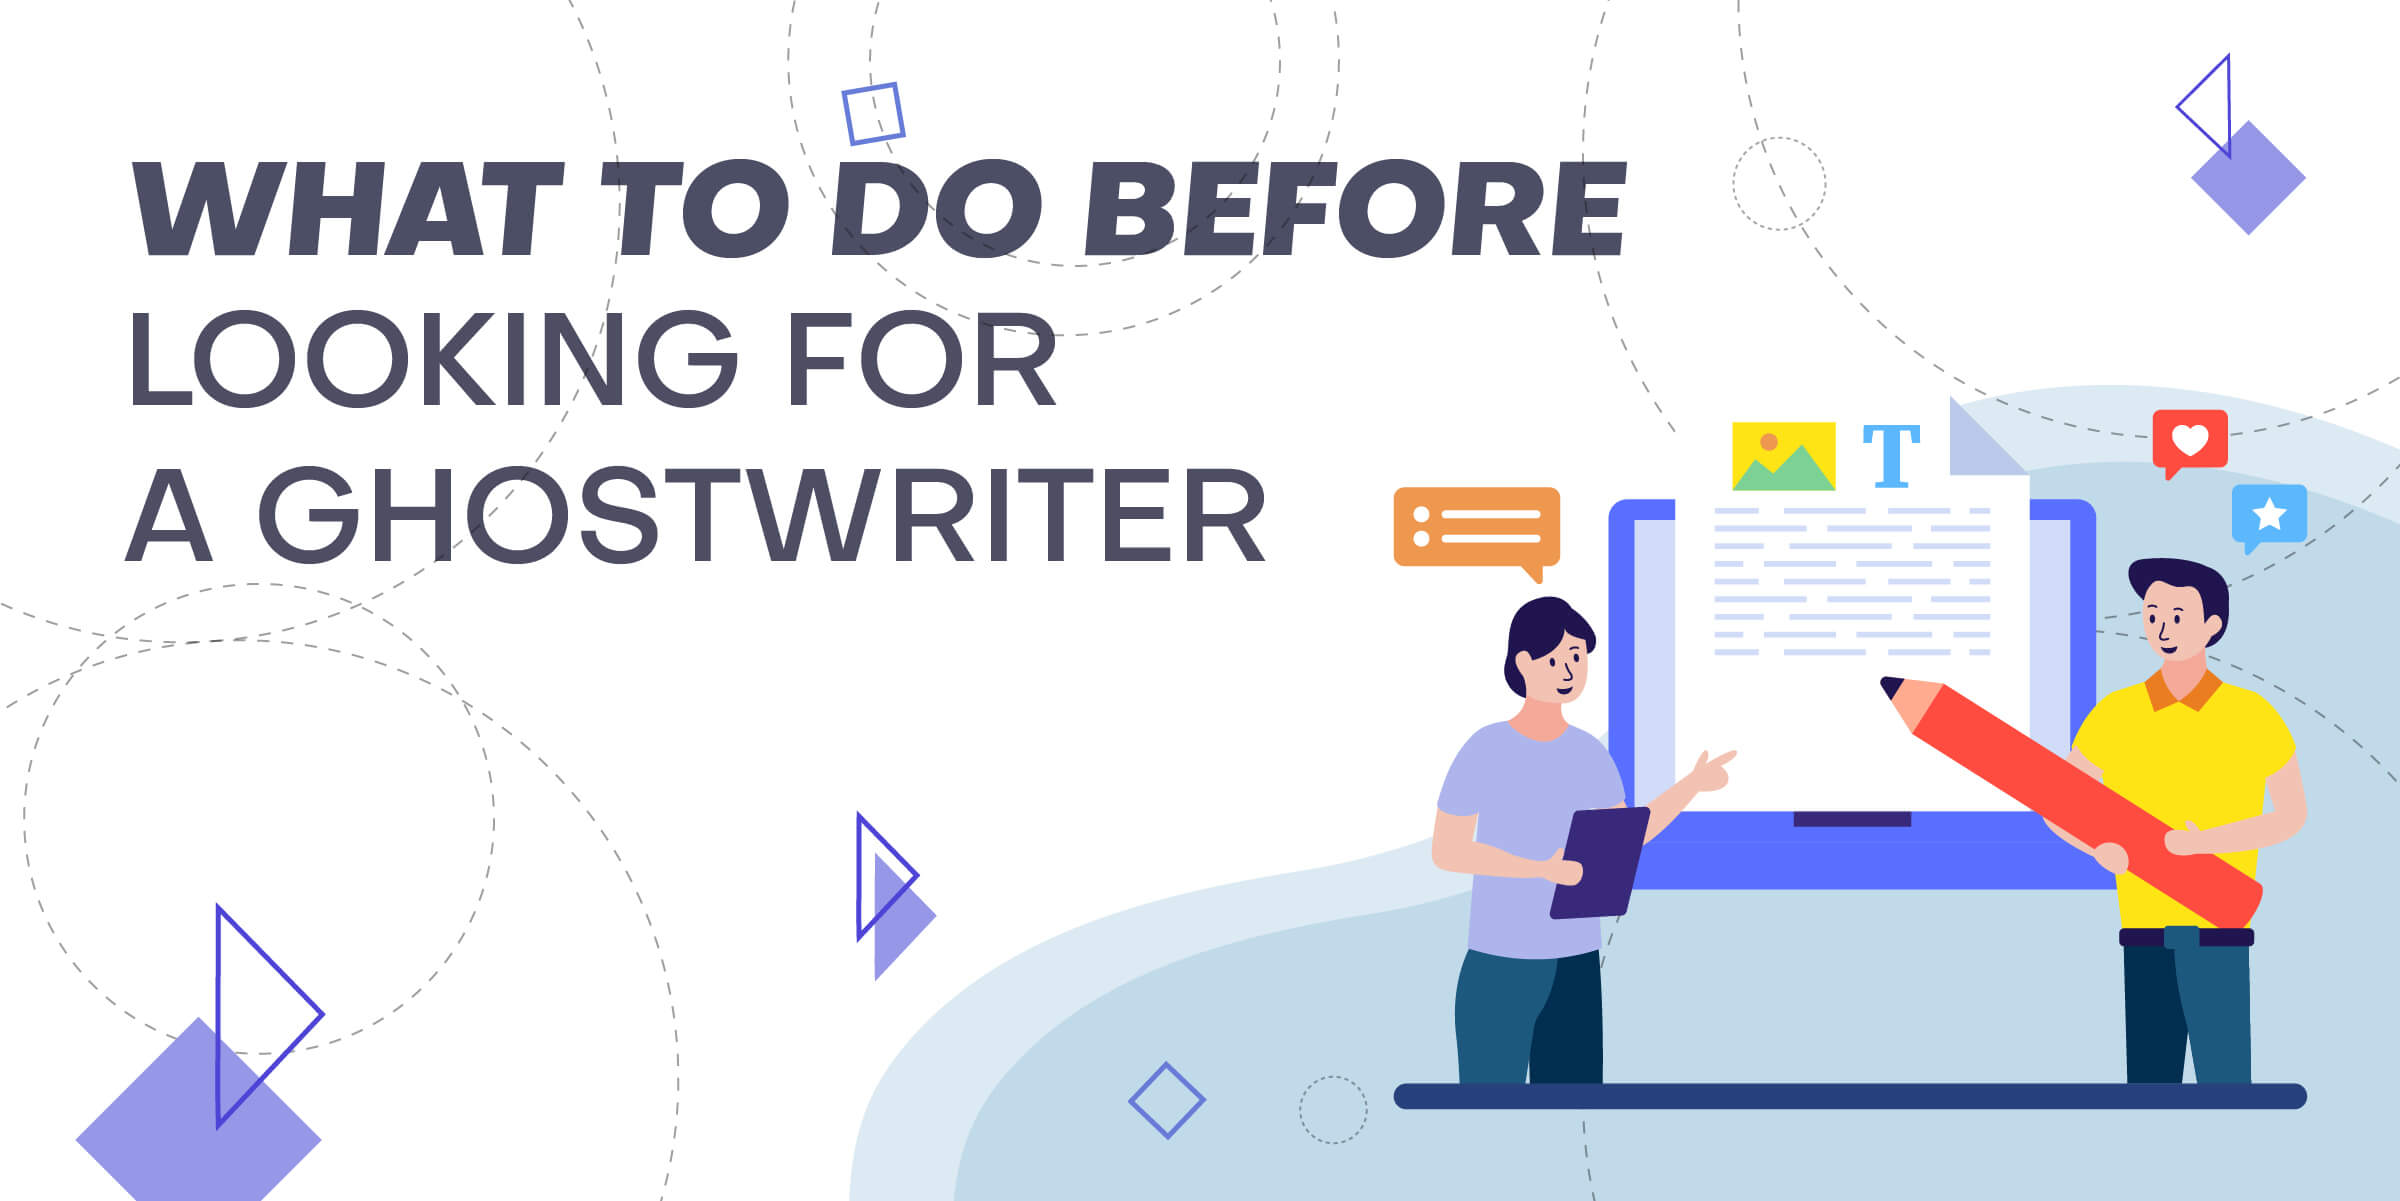 What To Do Before Looking for Ghostwriter